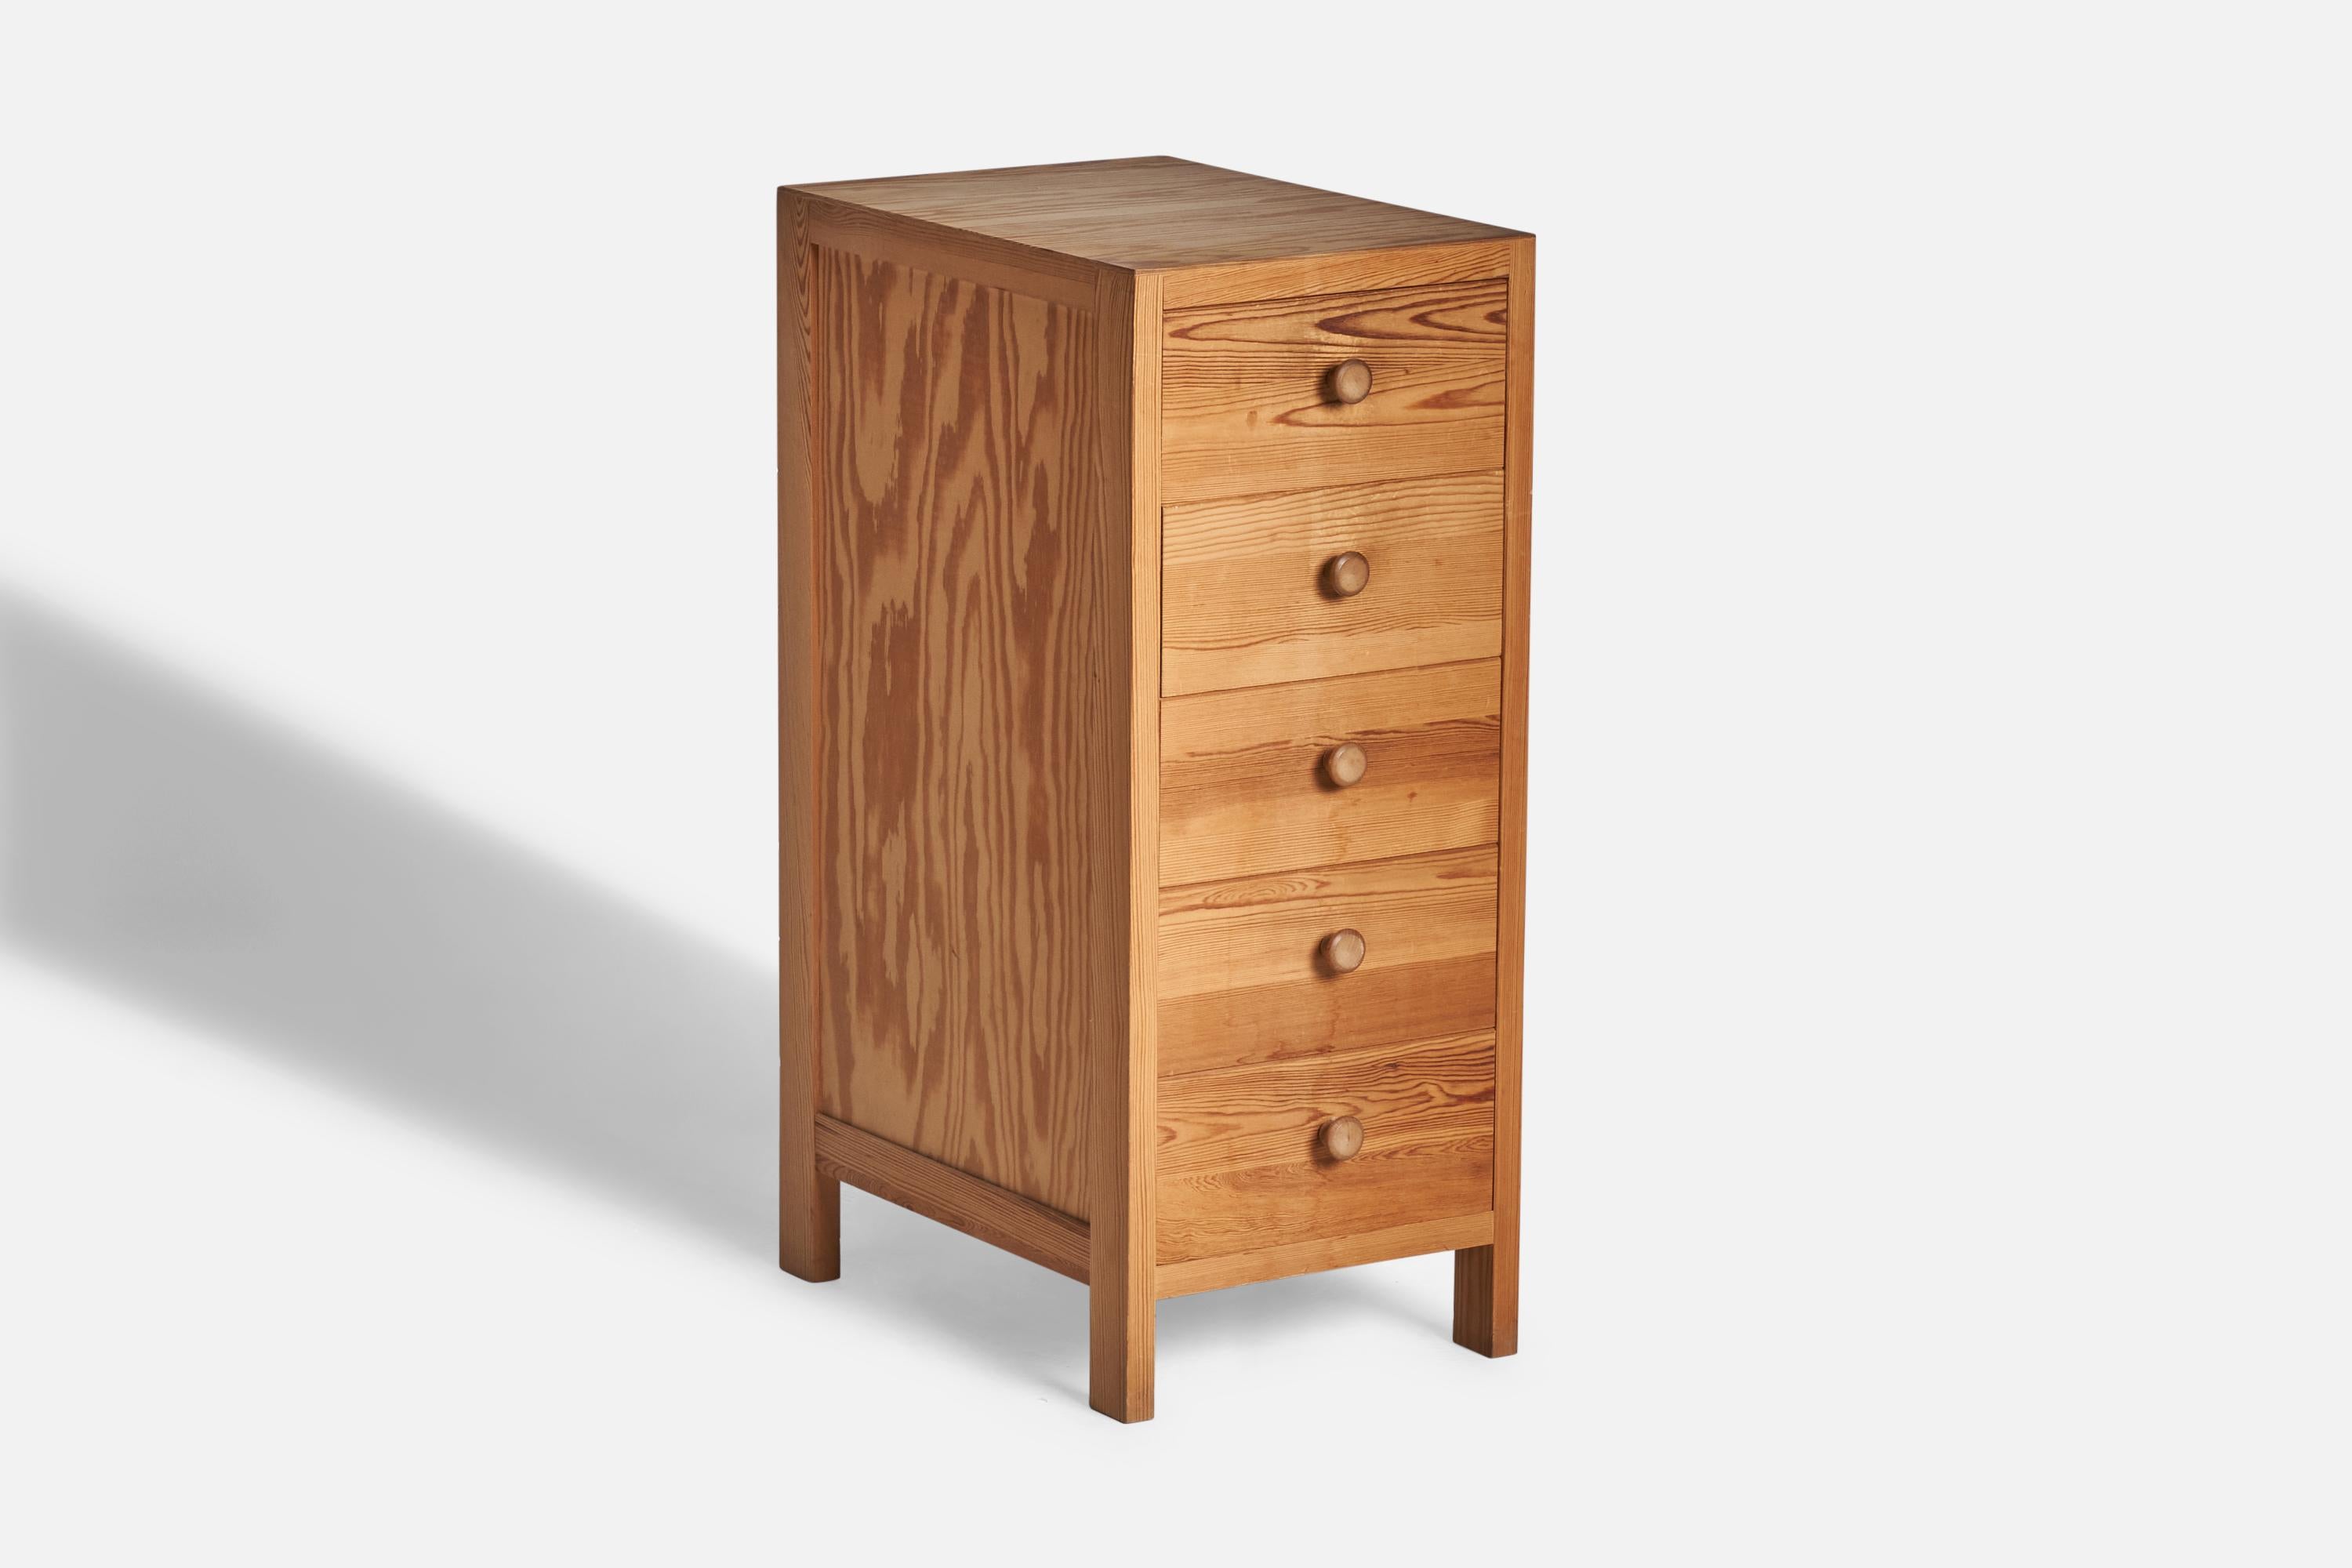 A pine cabinet designed and produced in Sweden, 1970s.